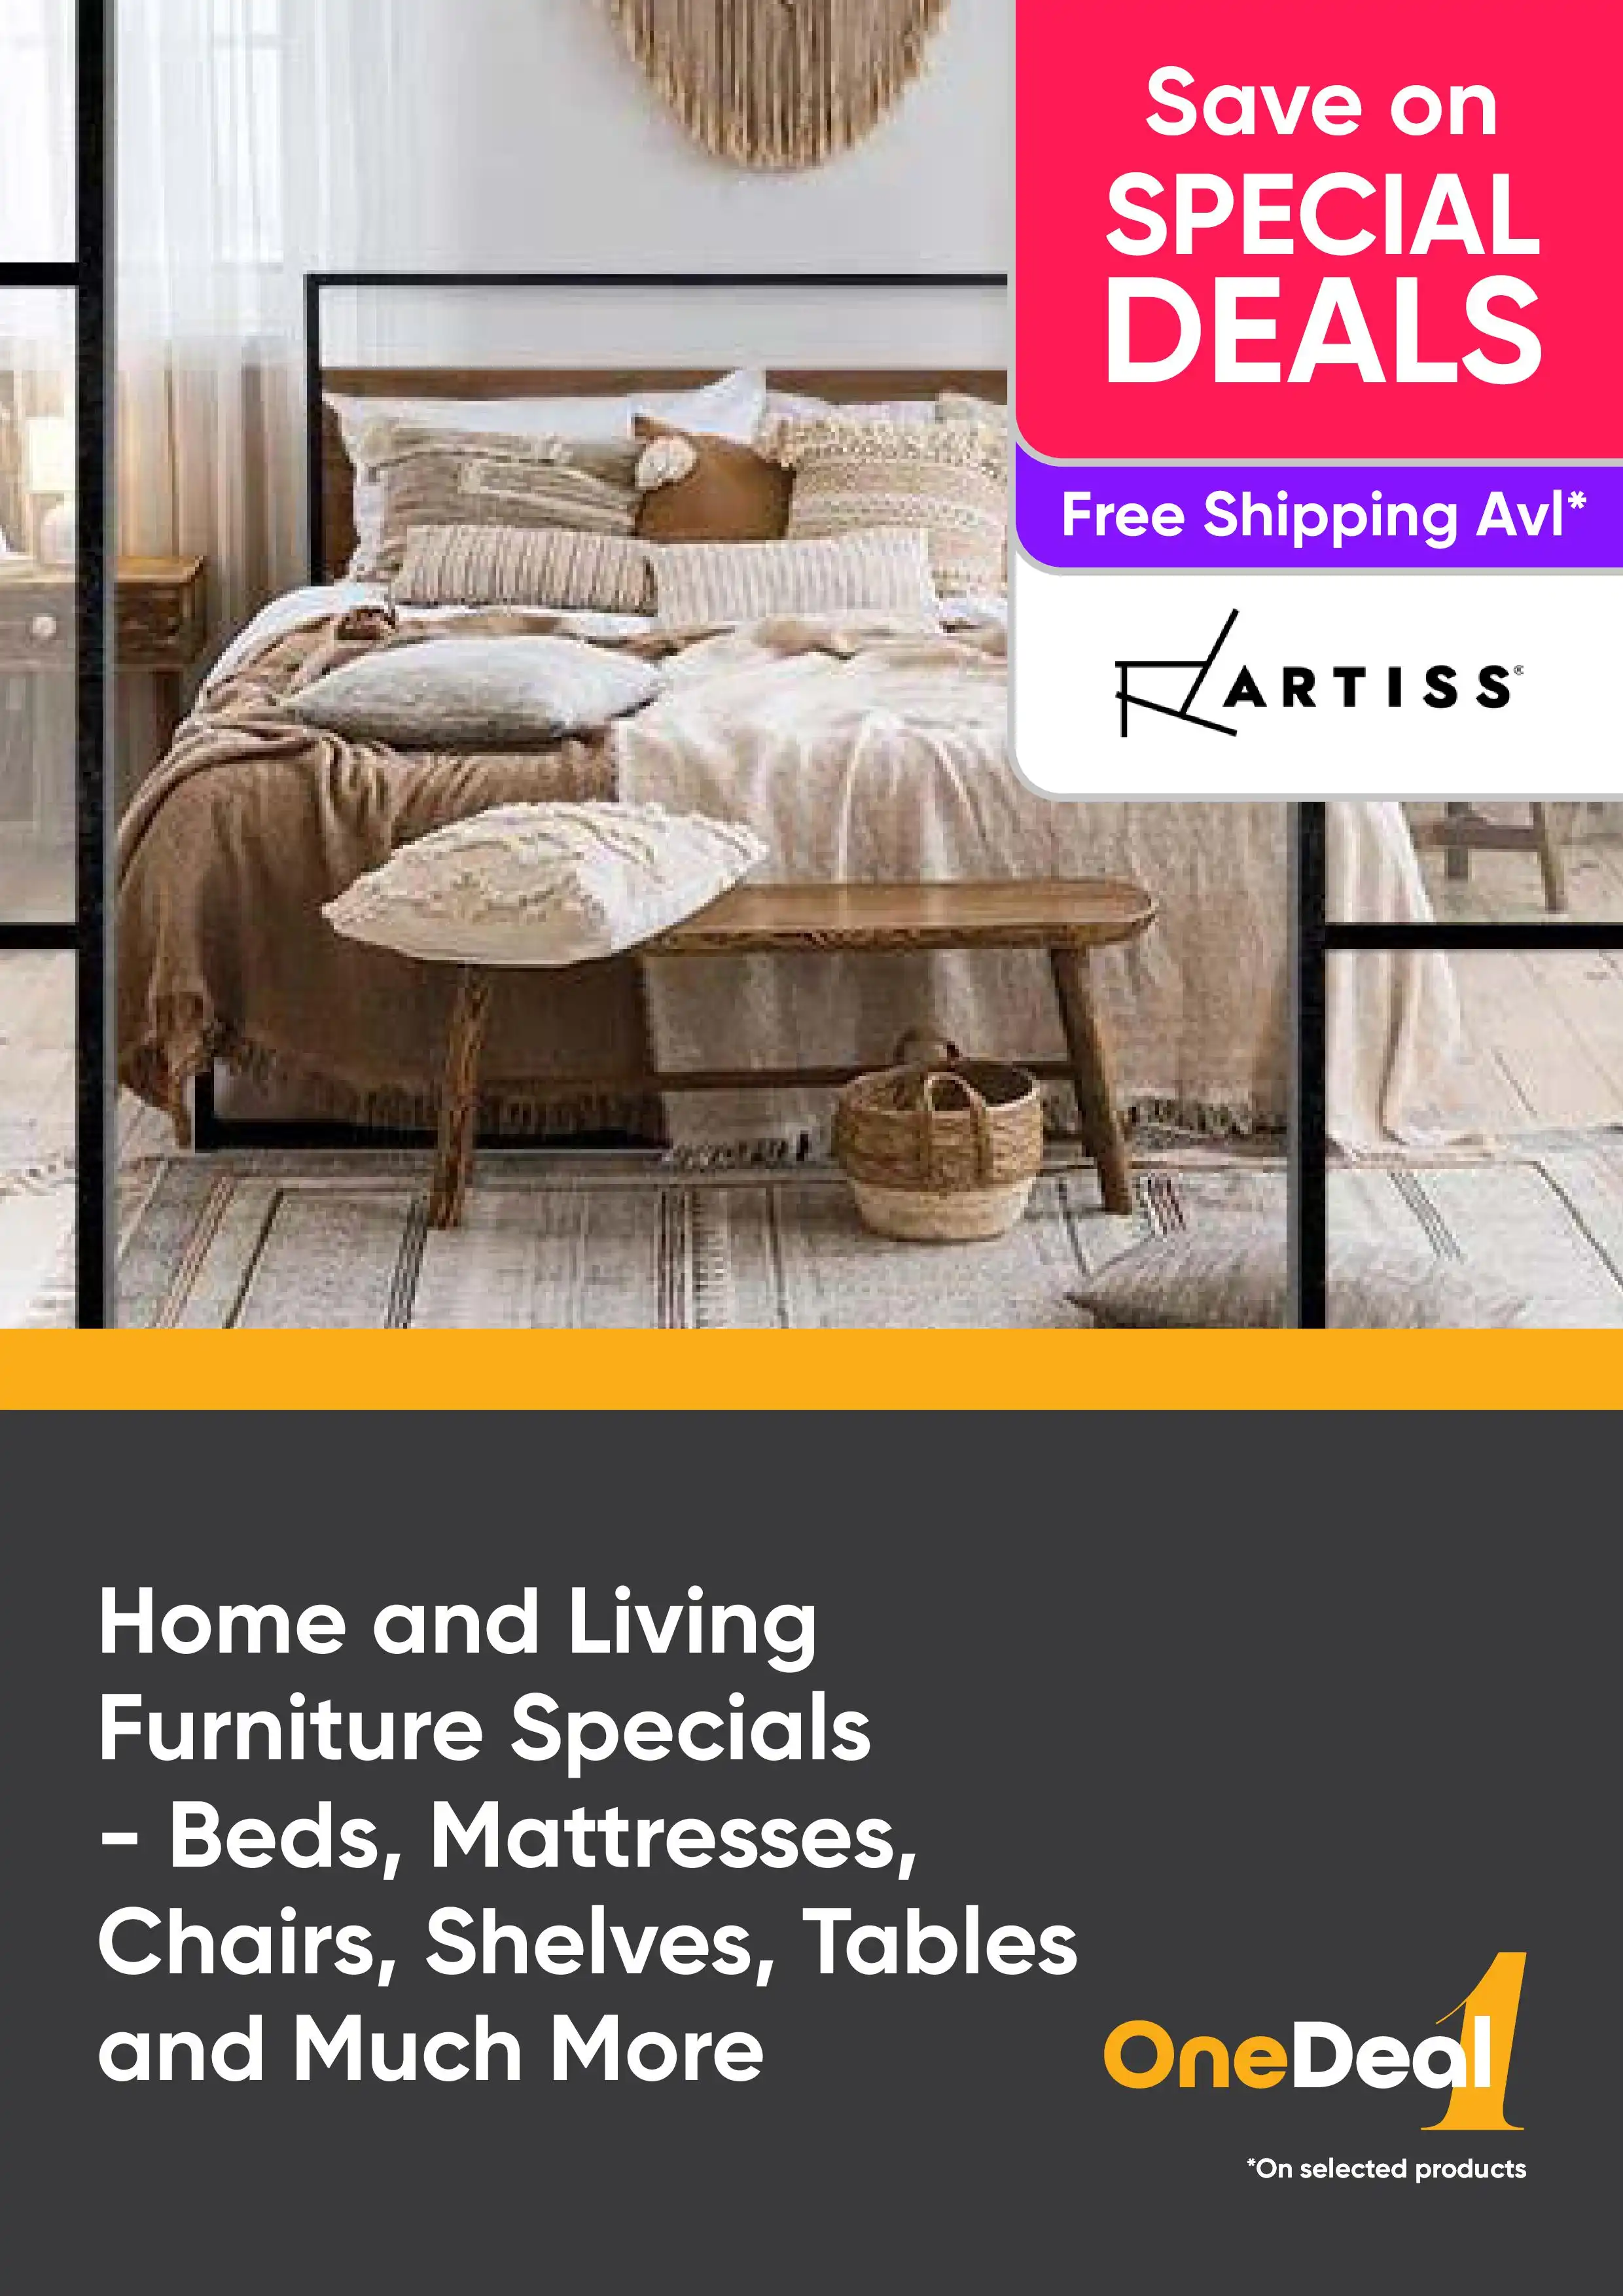 Home and Living Furniture Specials - Beds, Mattresses, Chairs, Shelves, Tables and More